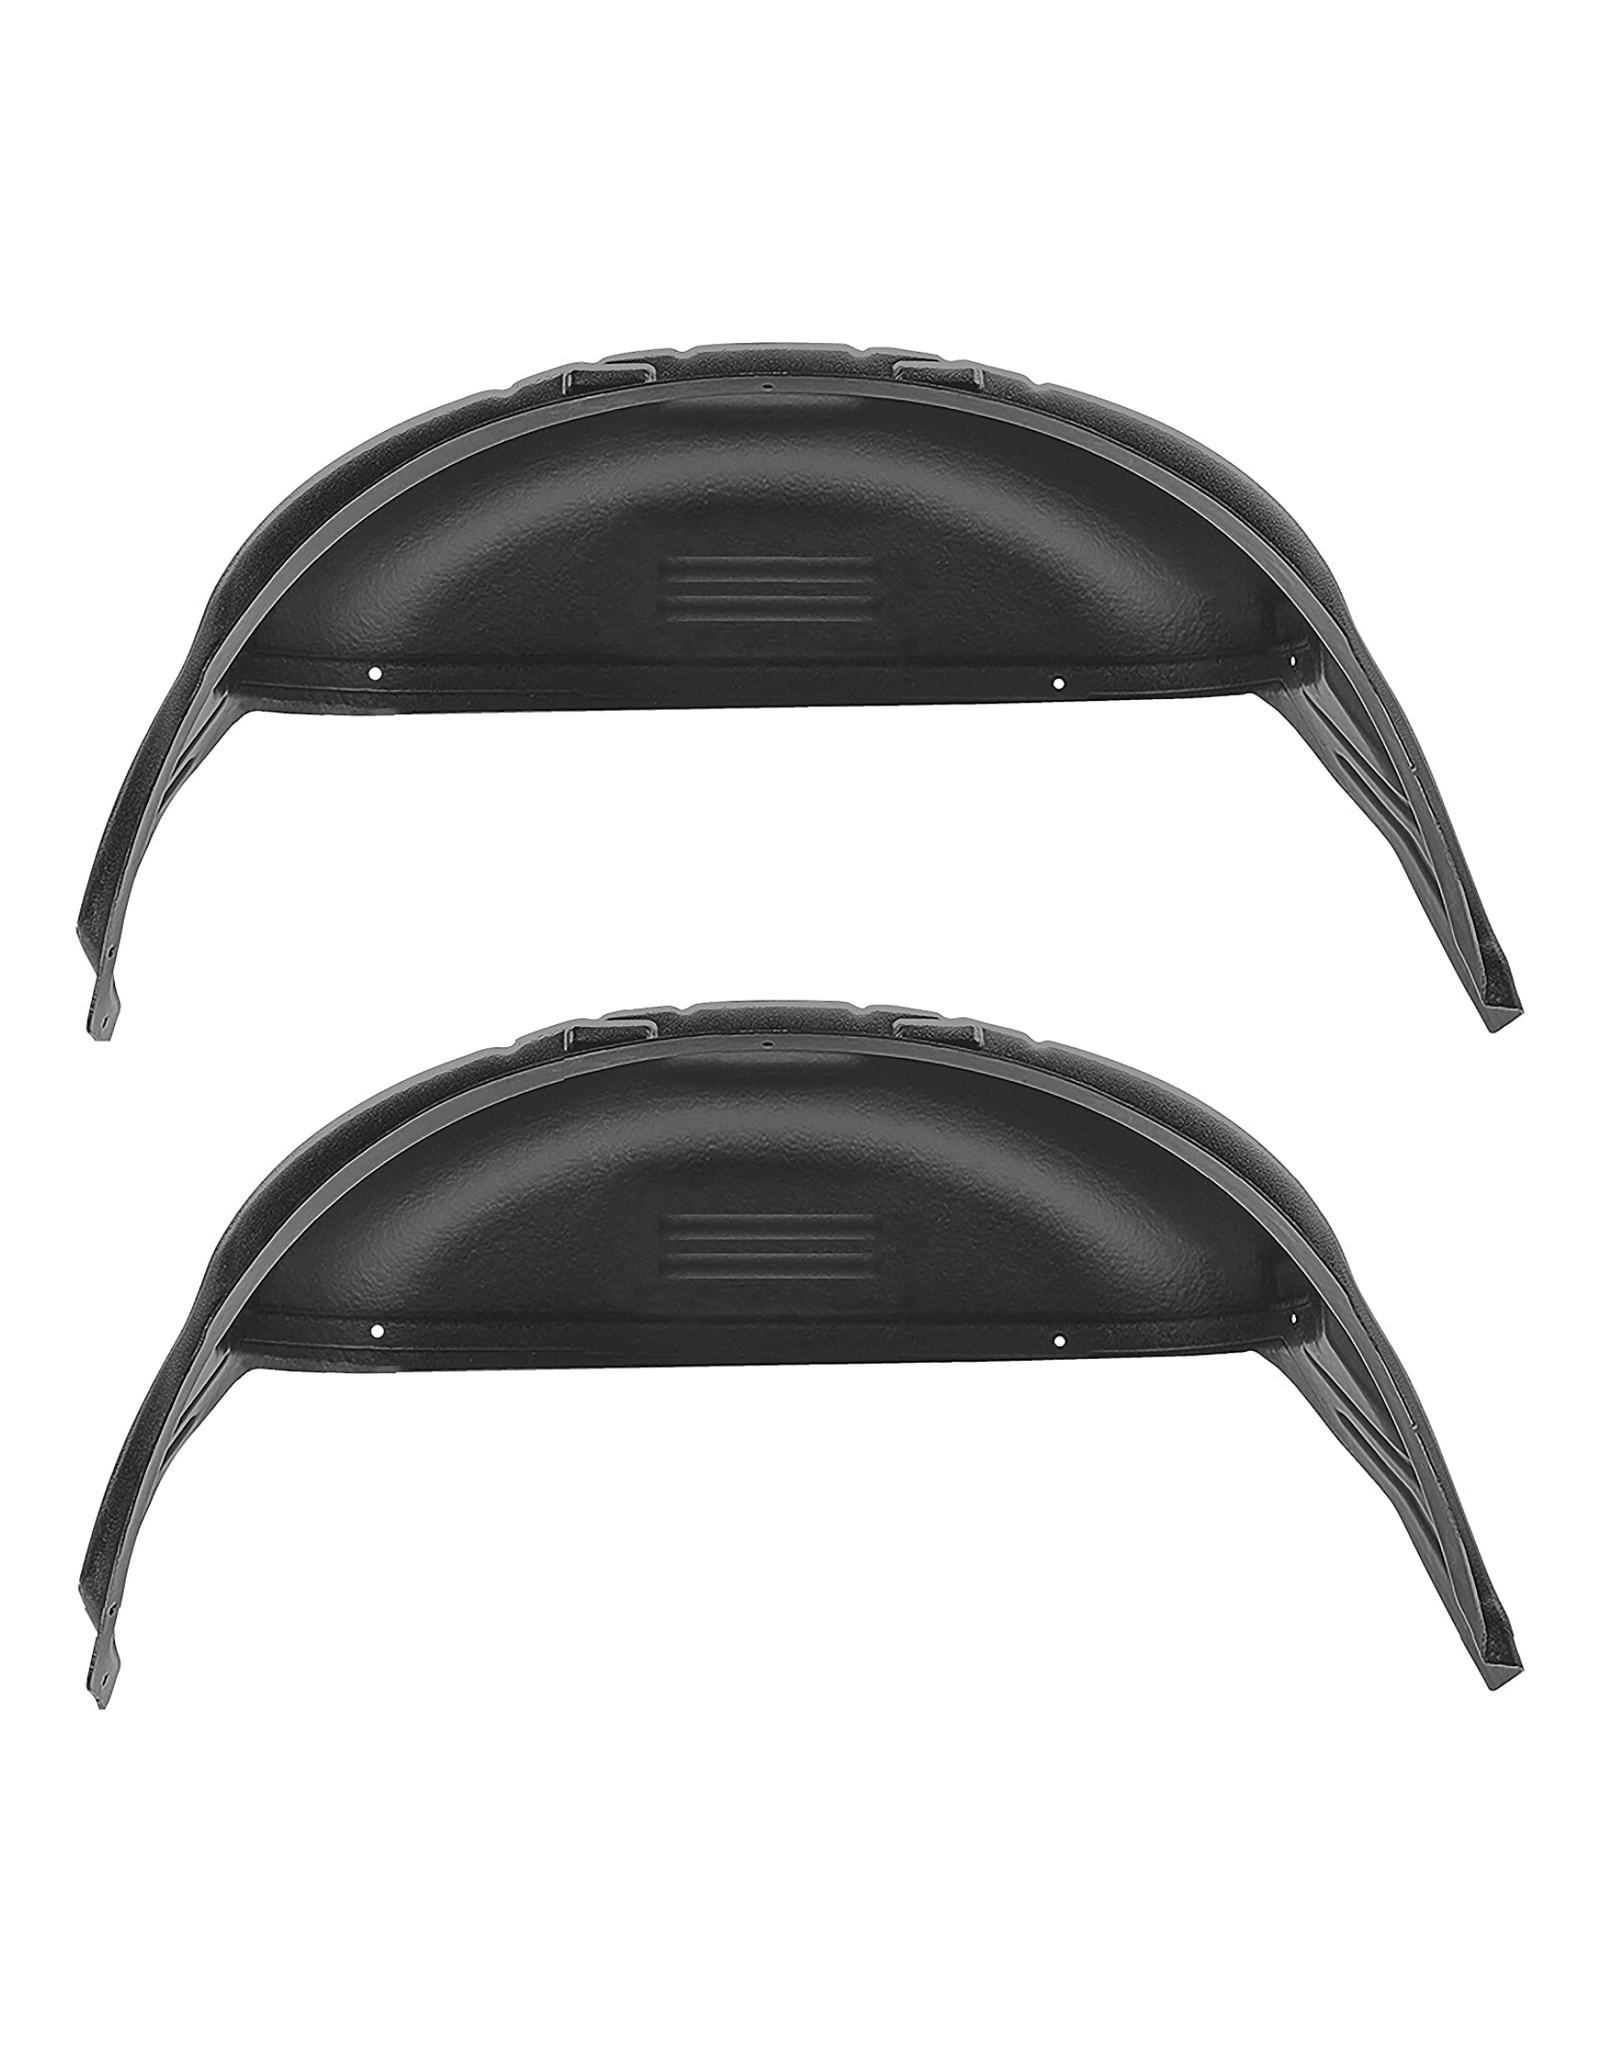 Husky Liners Wheel Well Guards, Rear Wheel Guards (79121) - Fits 2015-2020 Ford F-150 Except for Raptor, 2 Pcs, Black